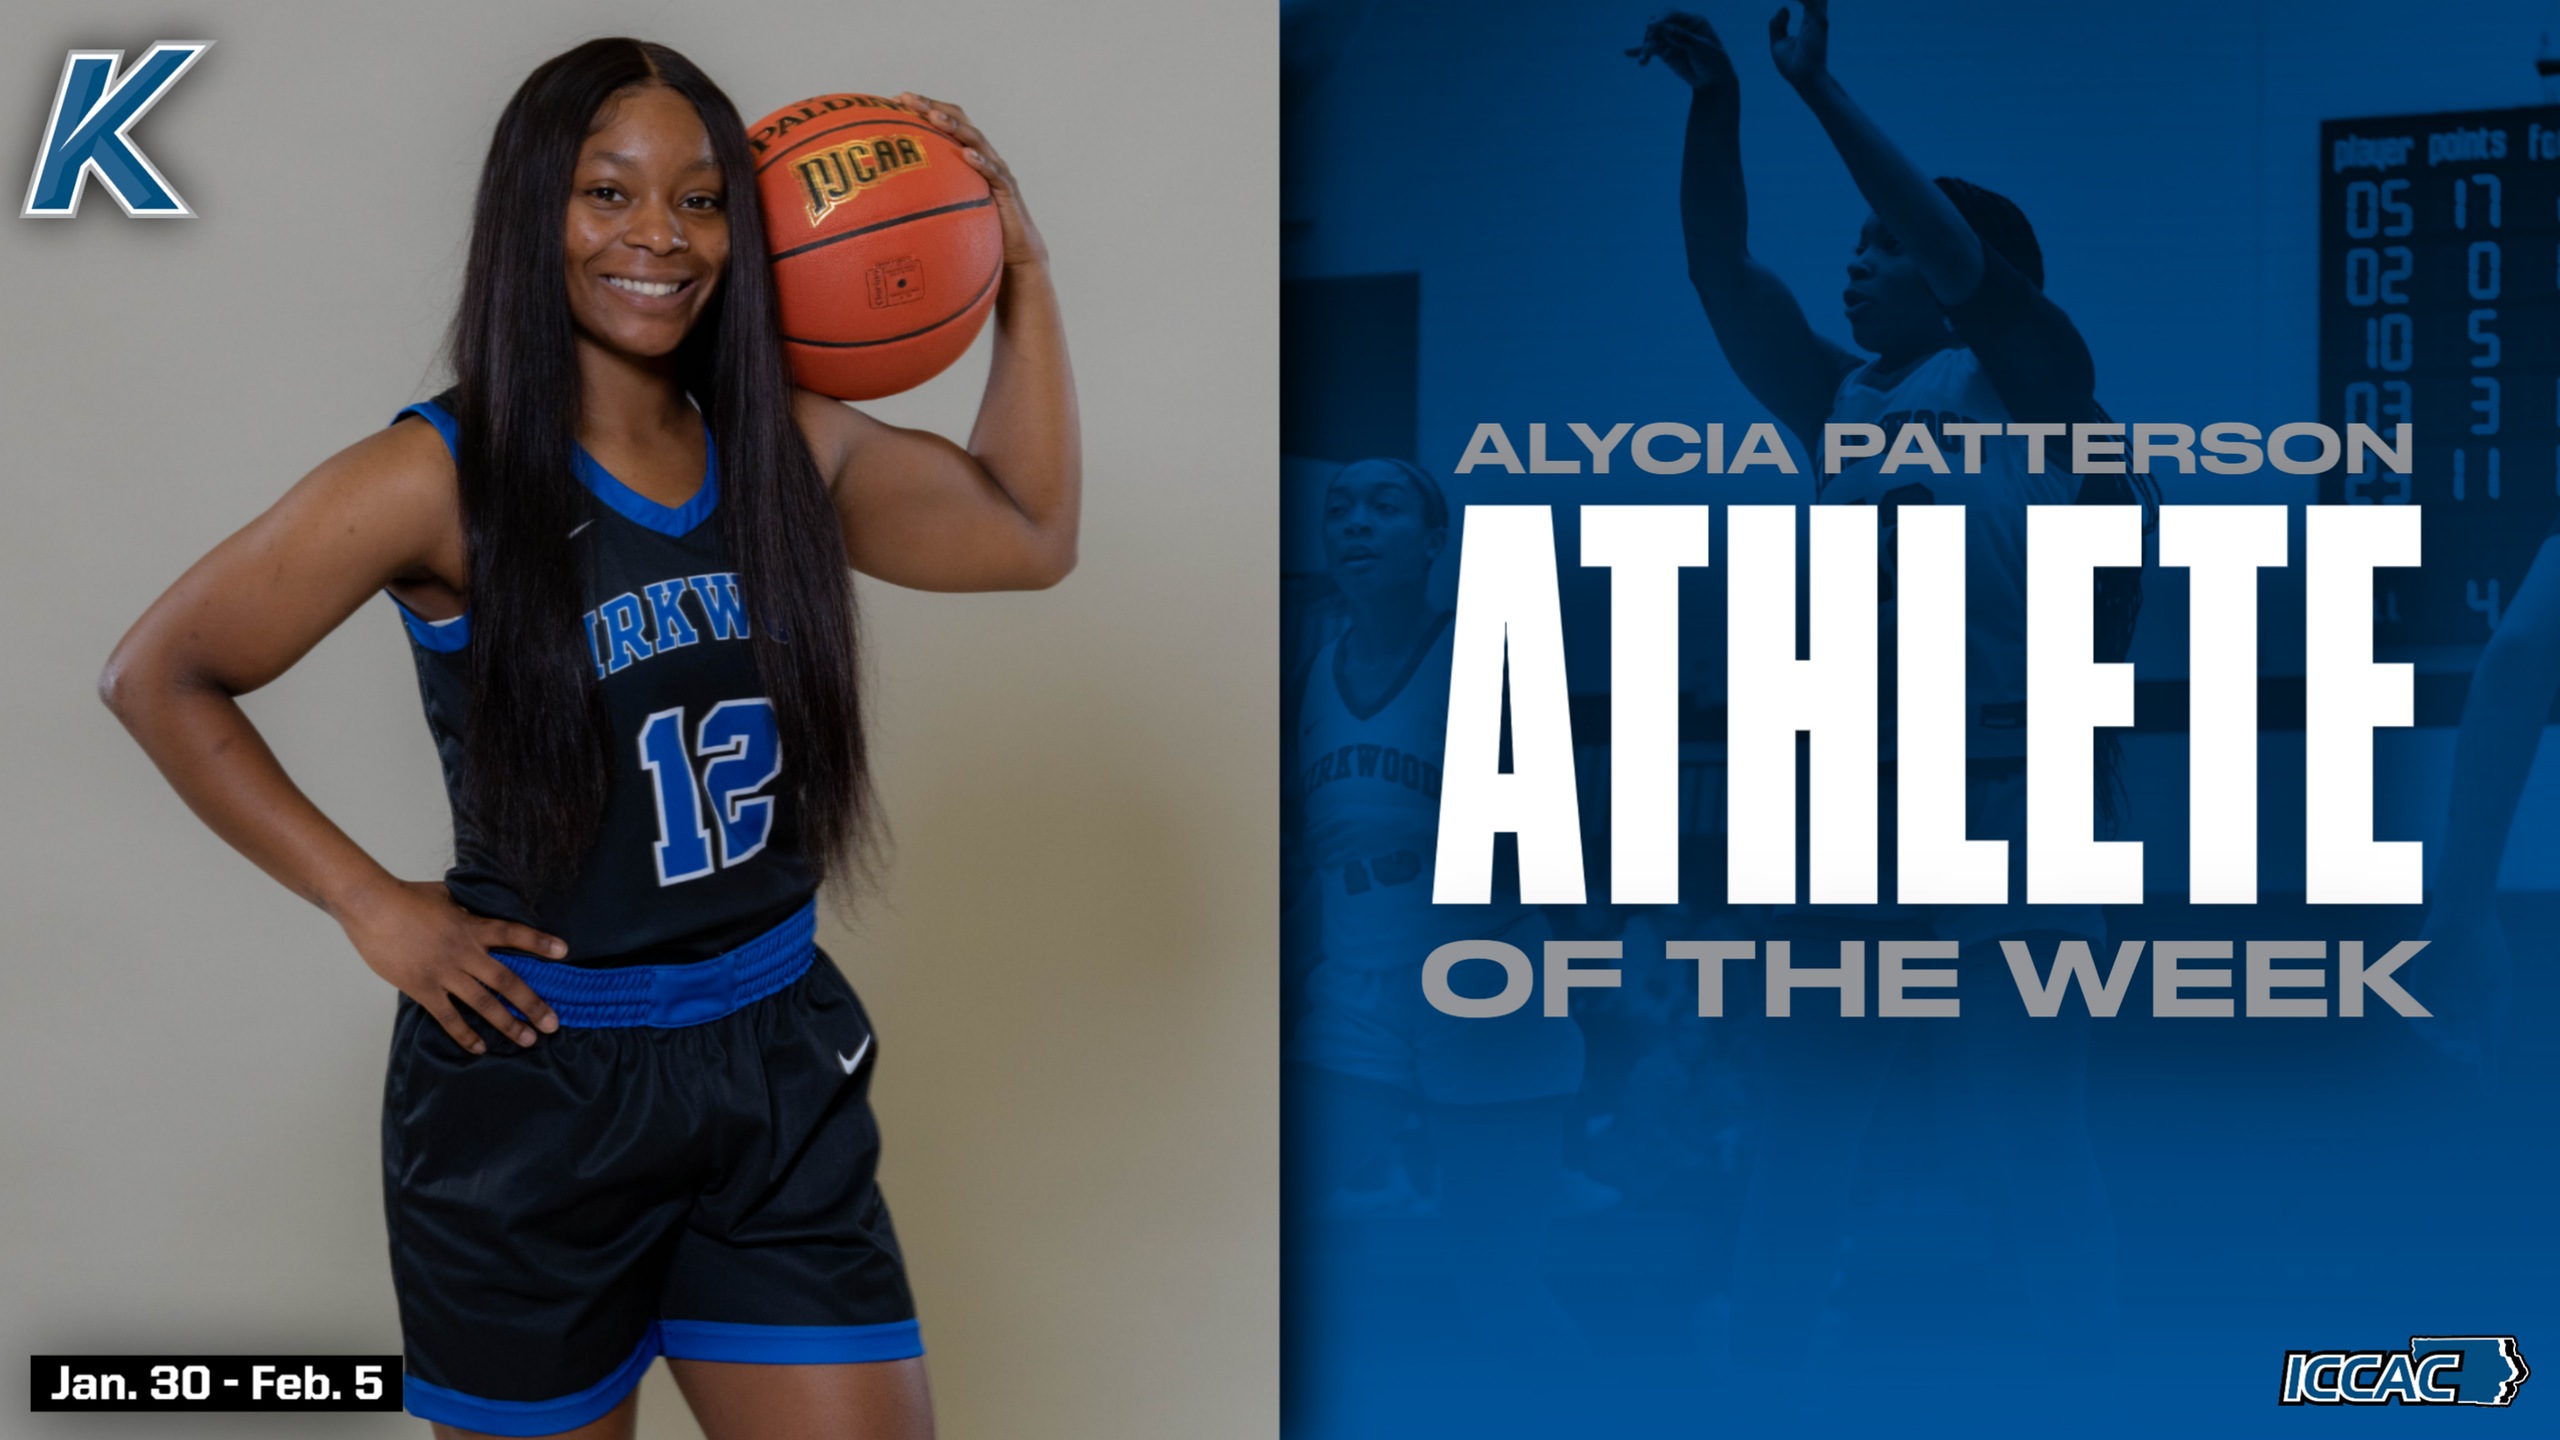 Patterson Named ICCAC Athlete of the Week | January 30-February 5